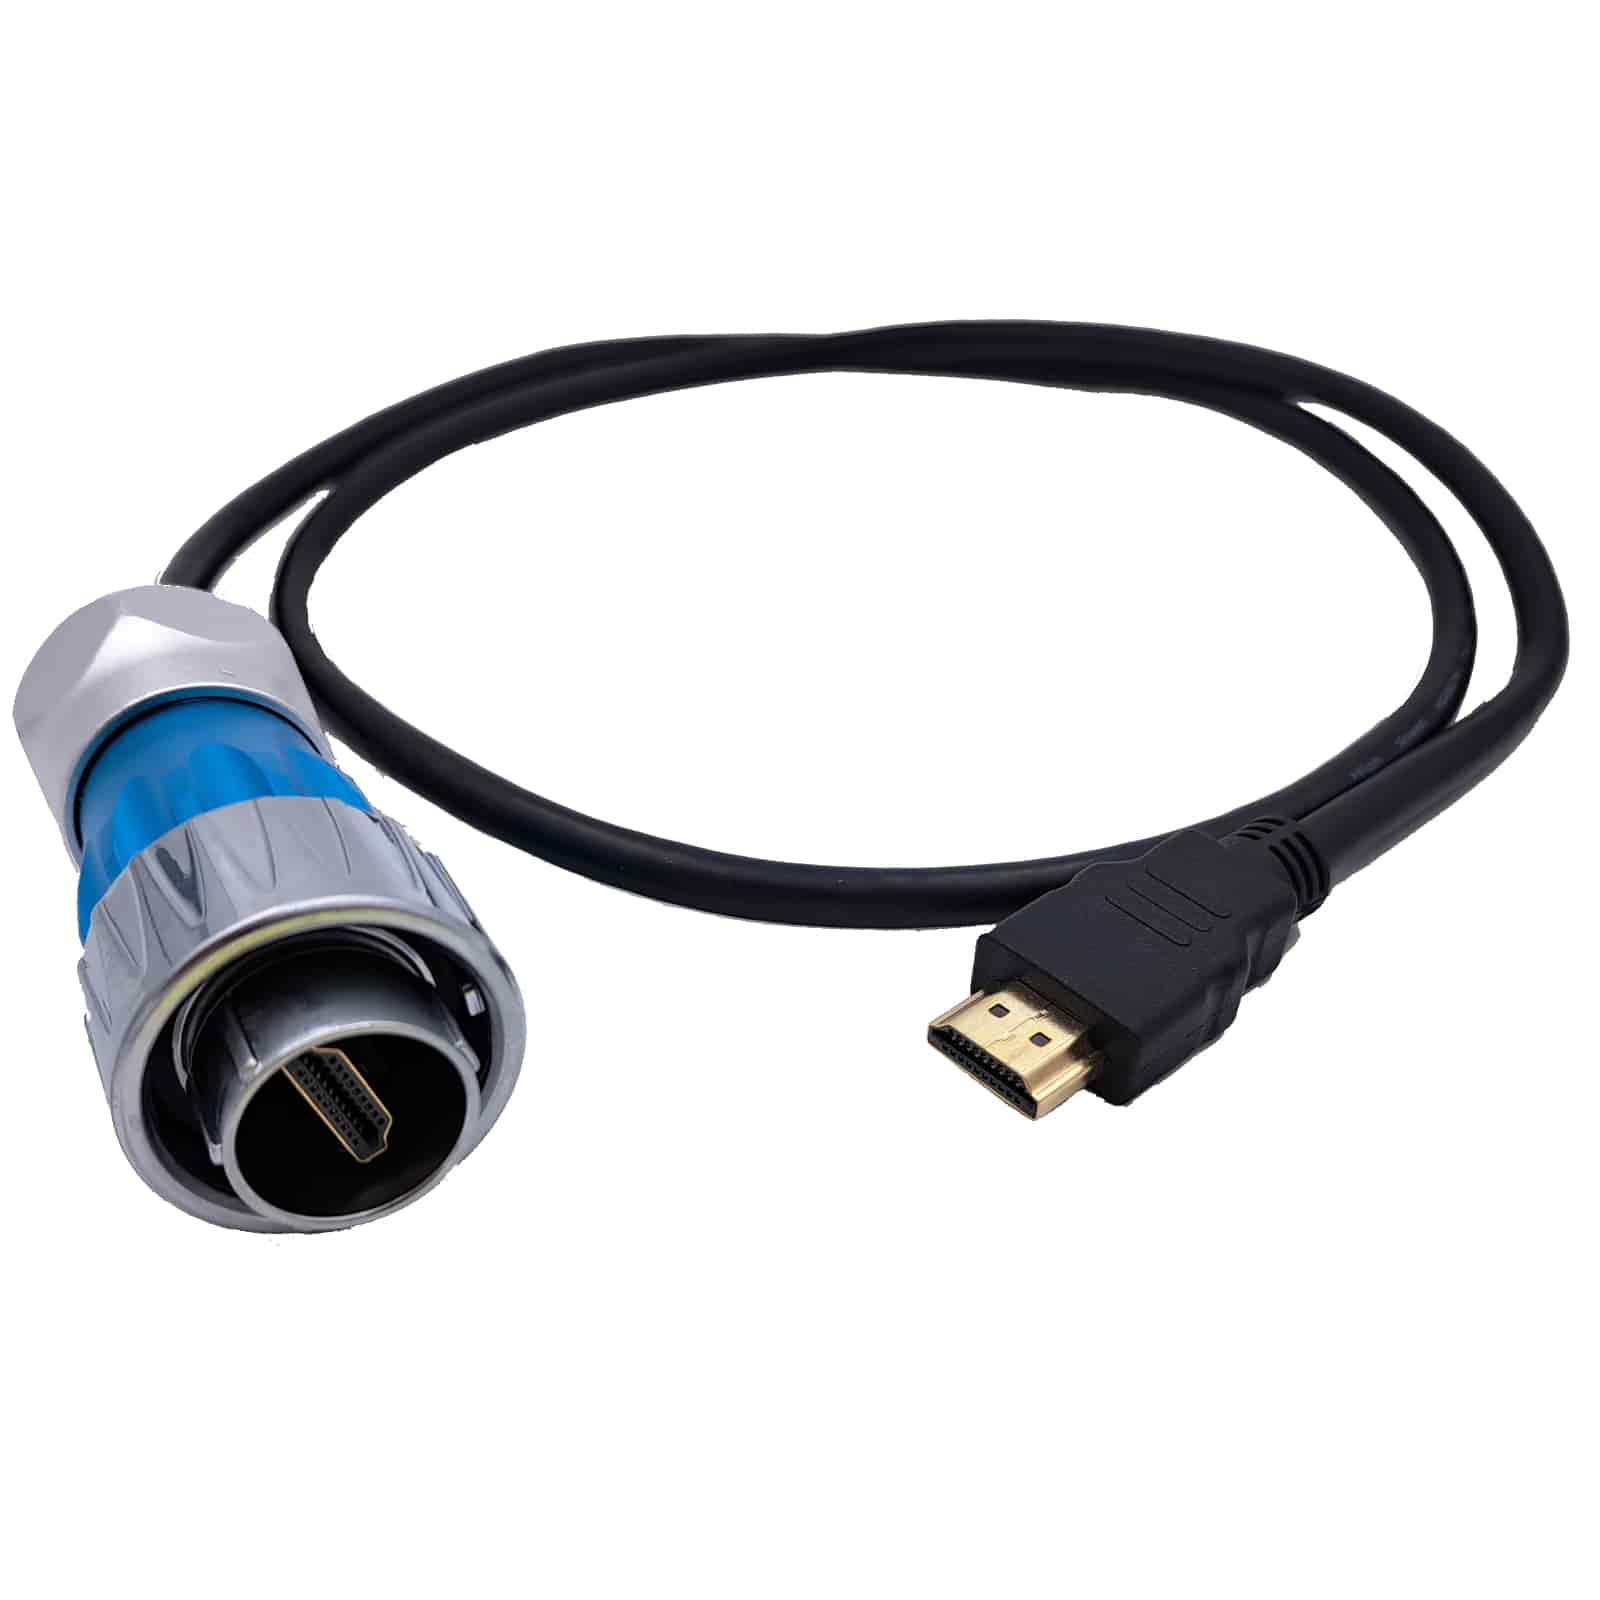 CNLINKO DH-24 series - USB 3.0 cable industrial - both ends with